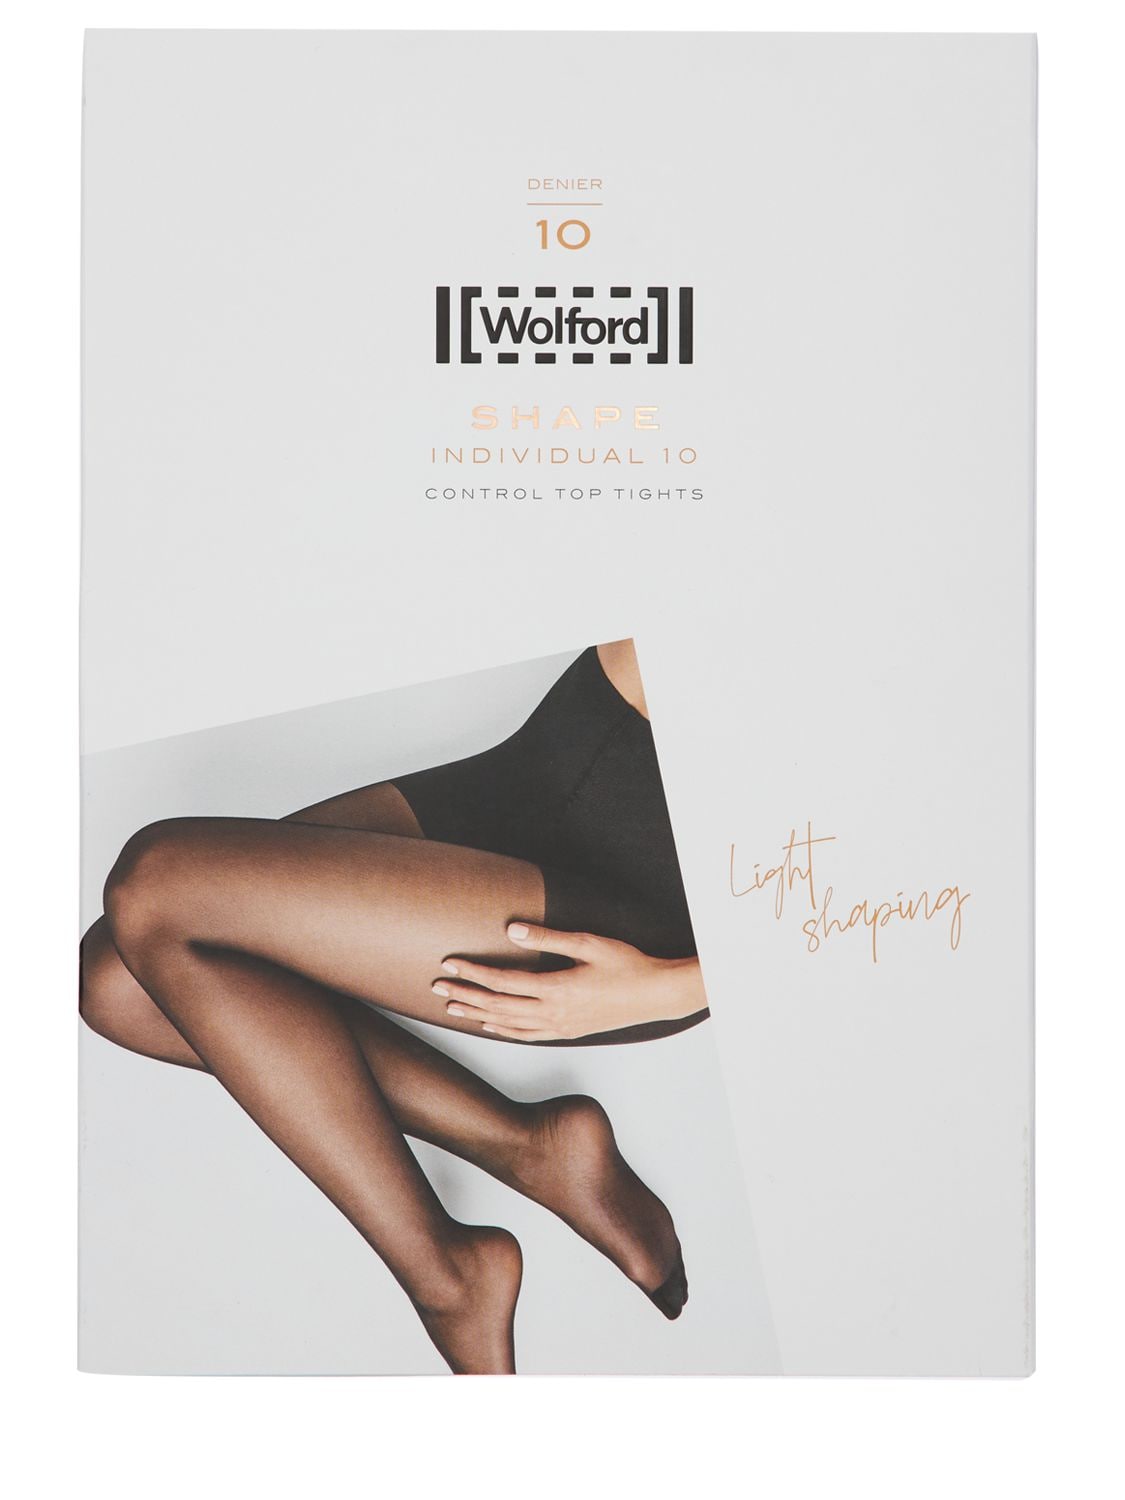 WOLFORD INDIVIDUAL 10 CONTROL TOP TIGHTS,73IVOP017-NZAWNQ2